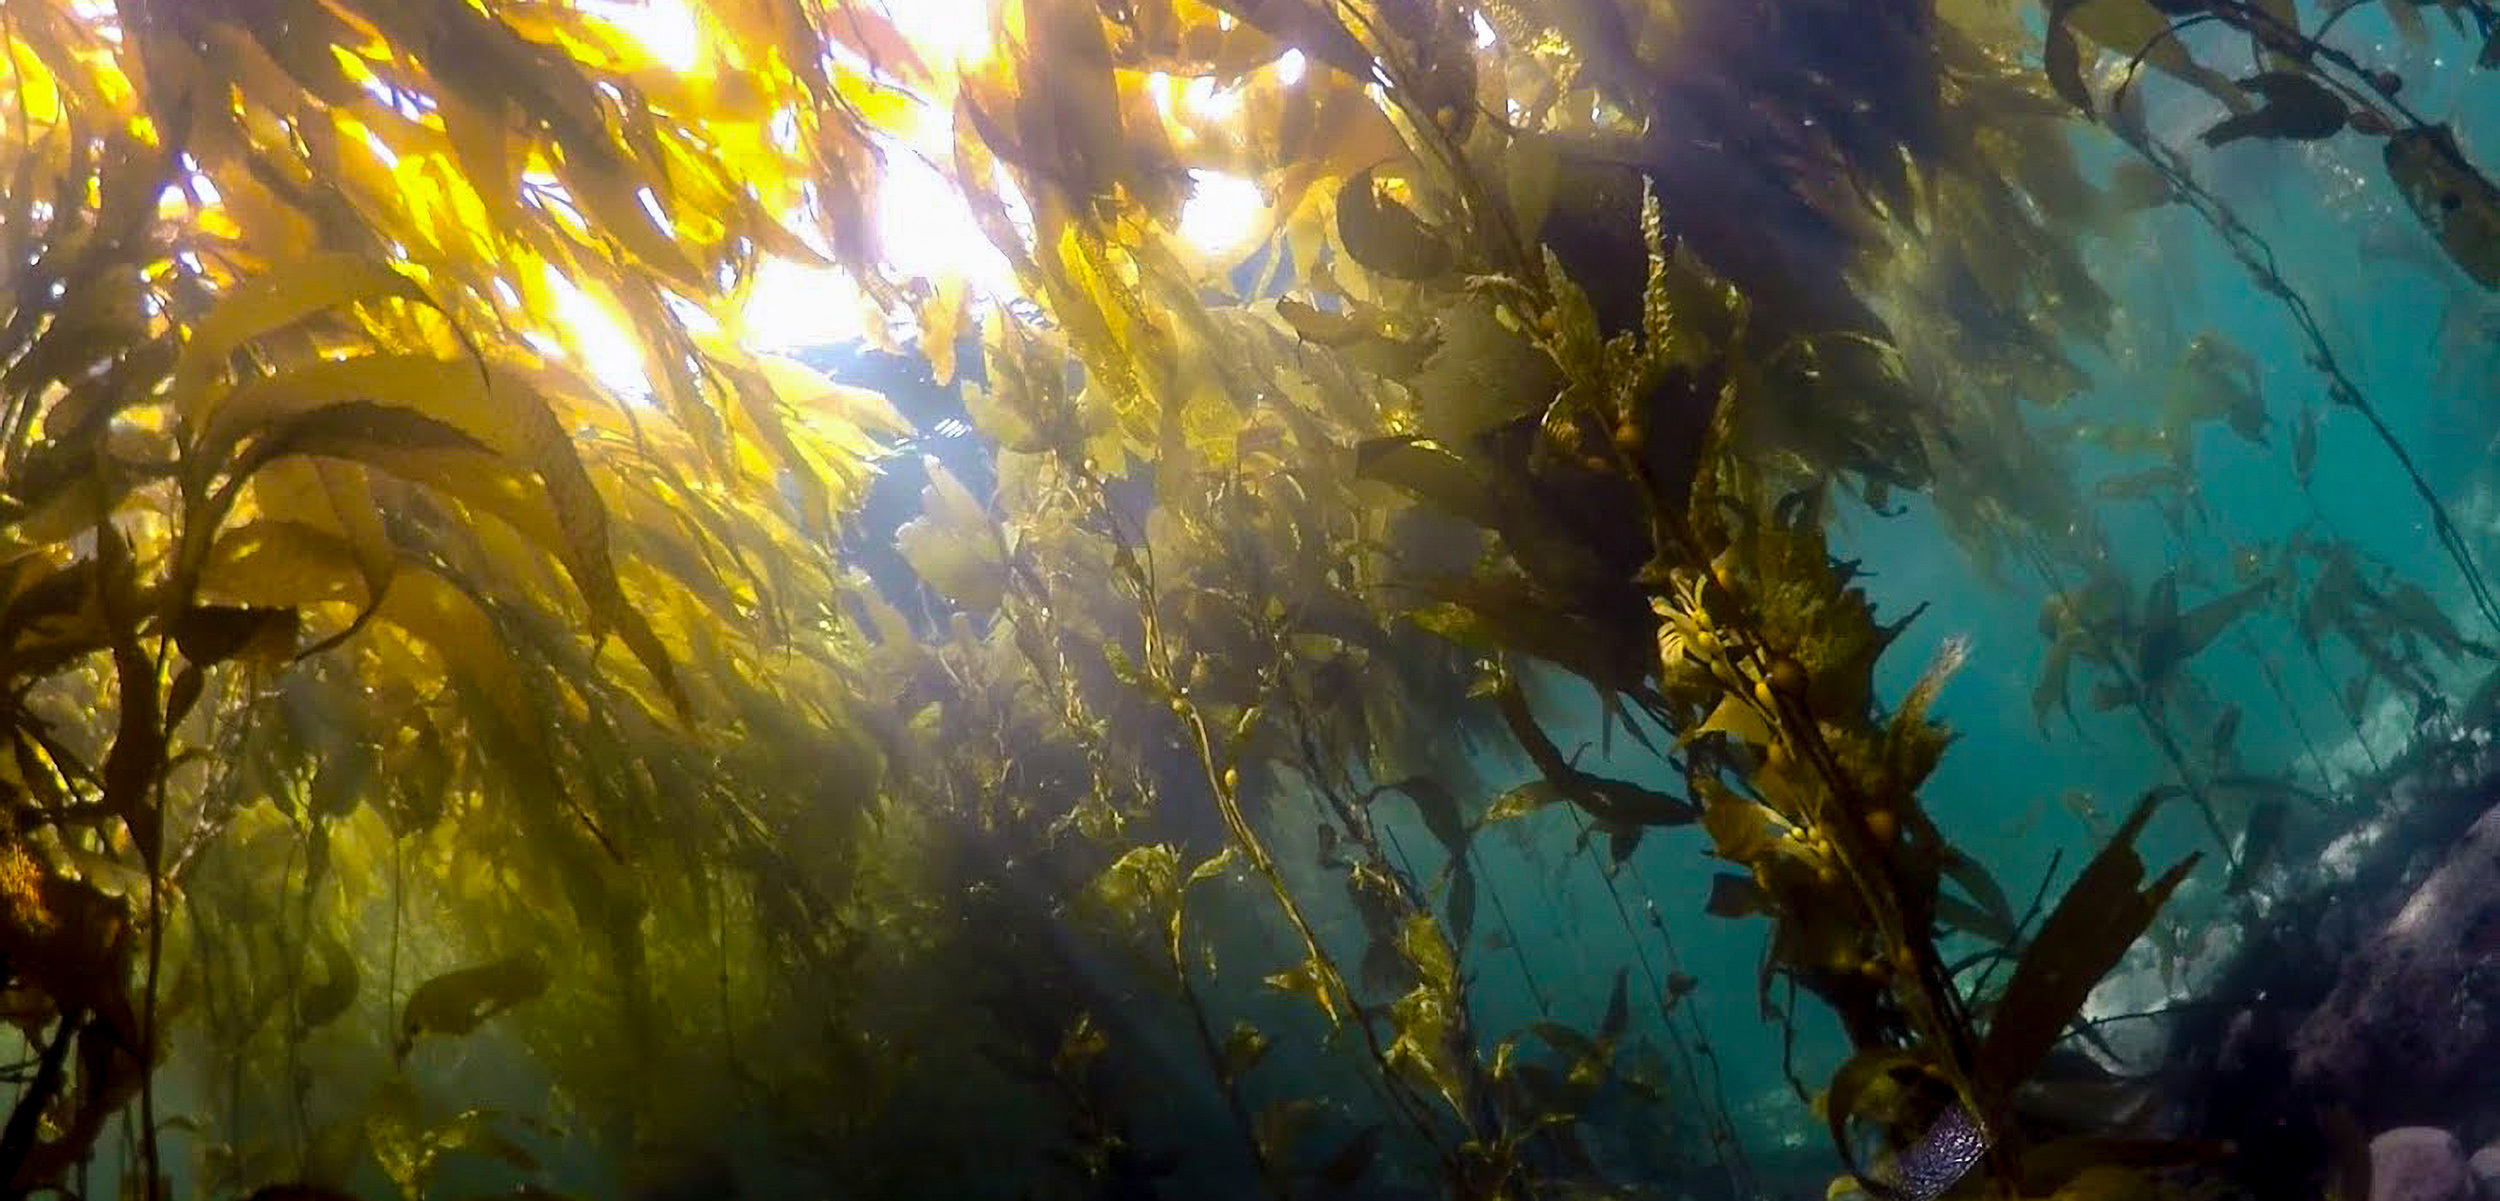 A shot of kelp from below with the sun illuminating it above the water.